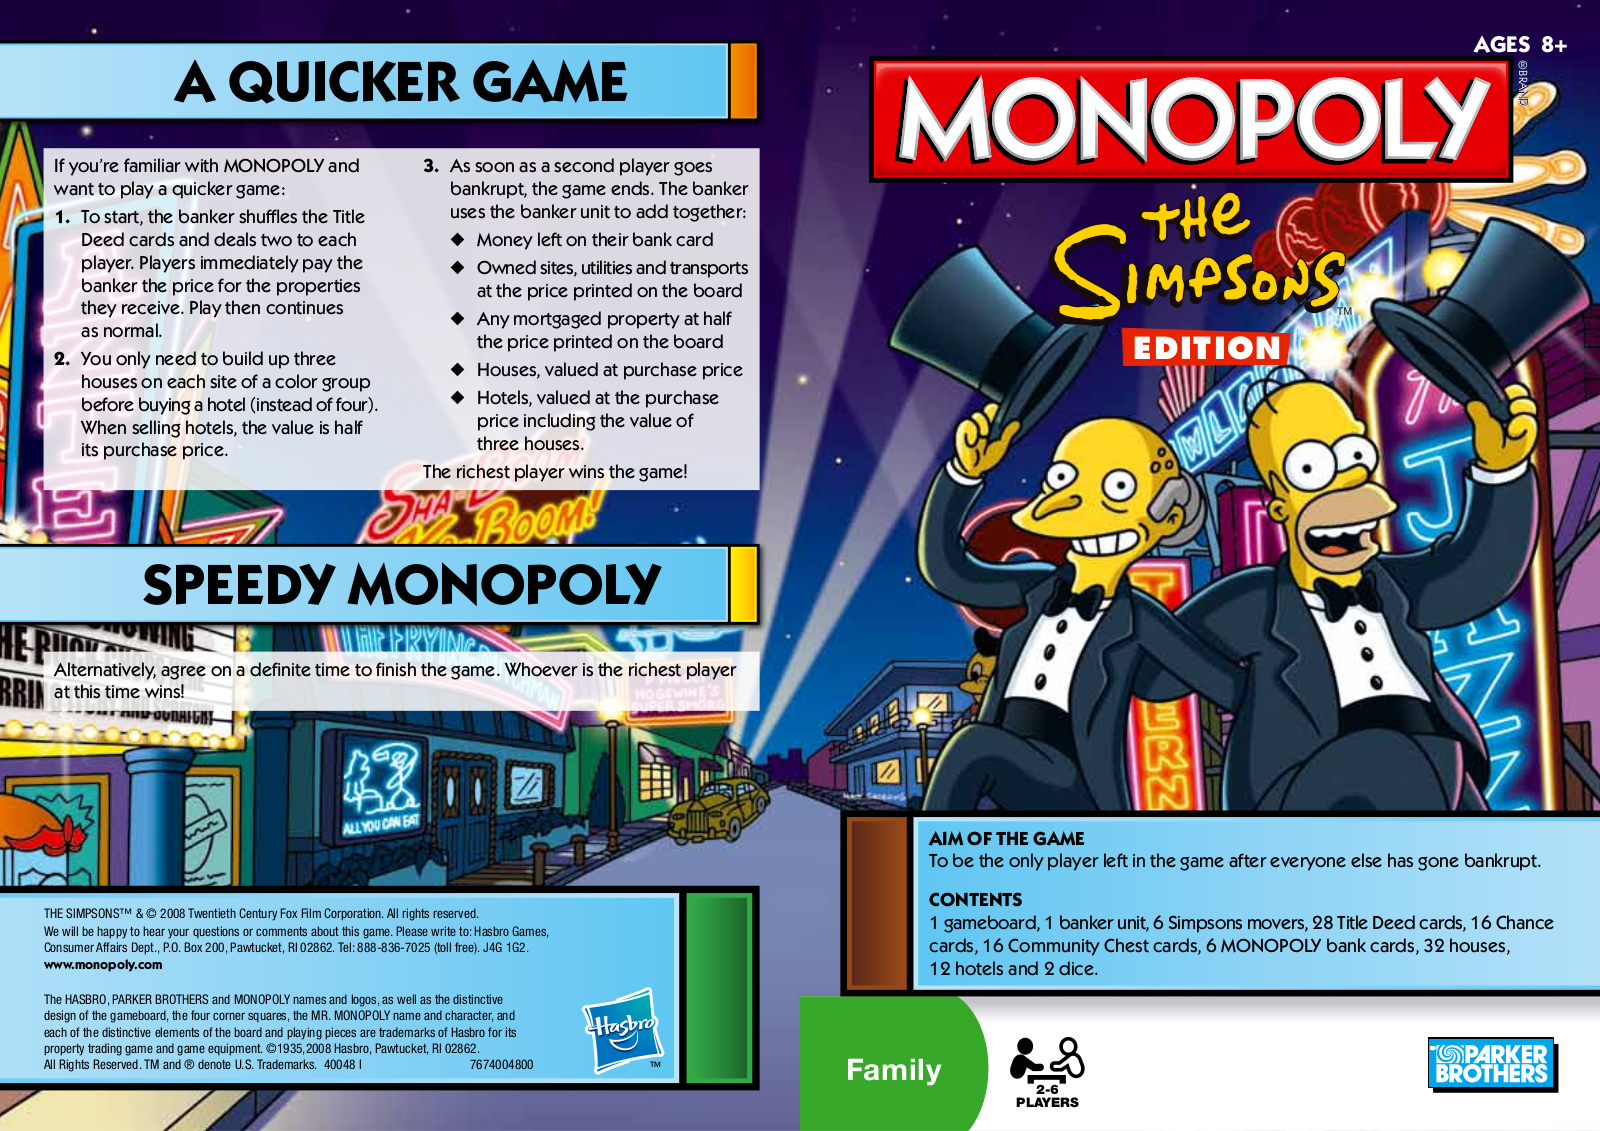 HASBRO Monopoly The Simpsons Edition User Manual